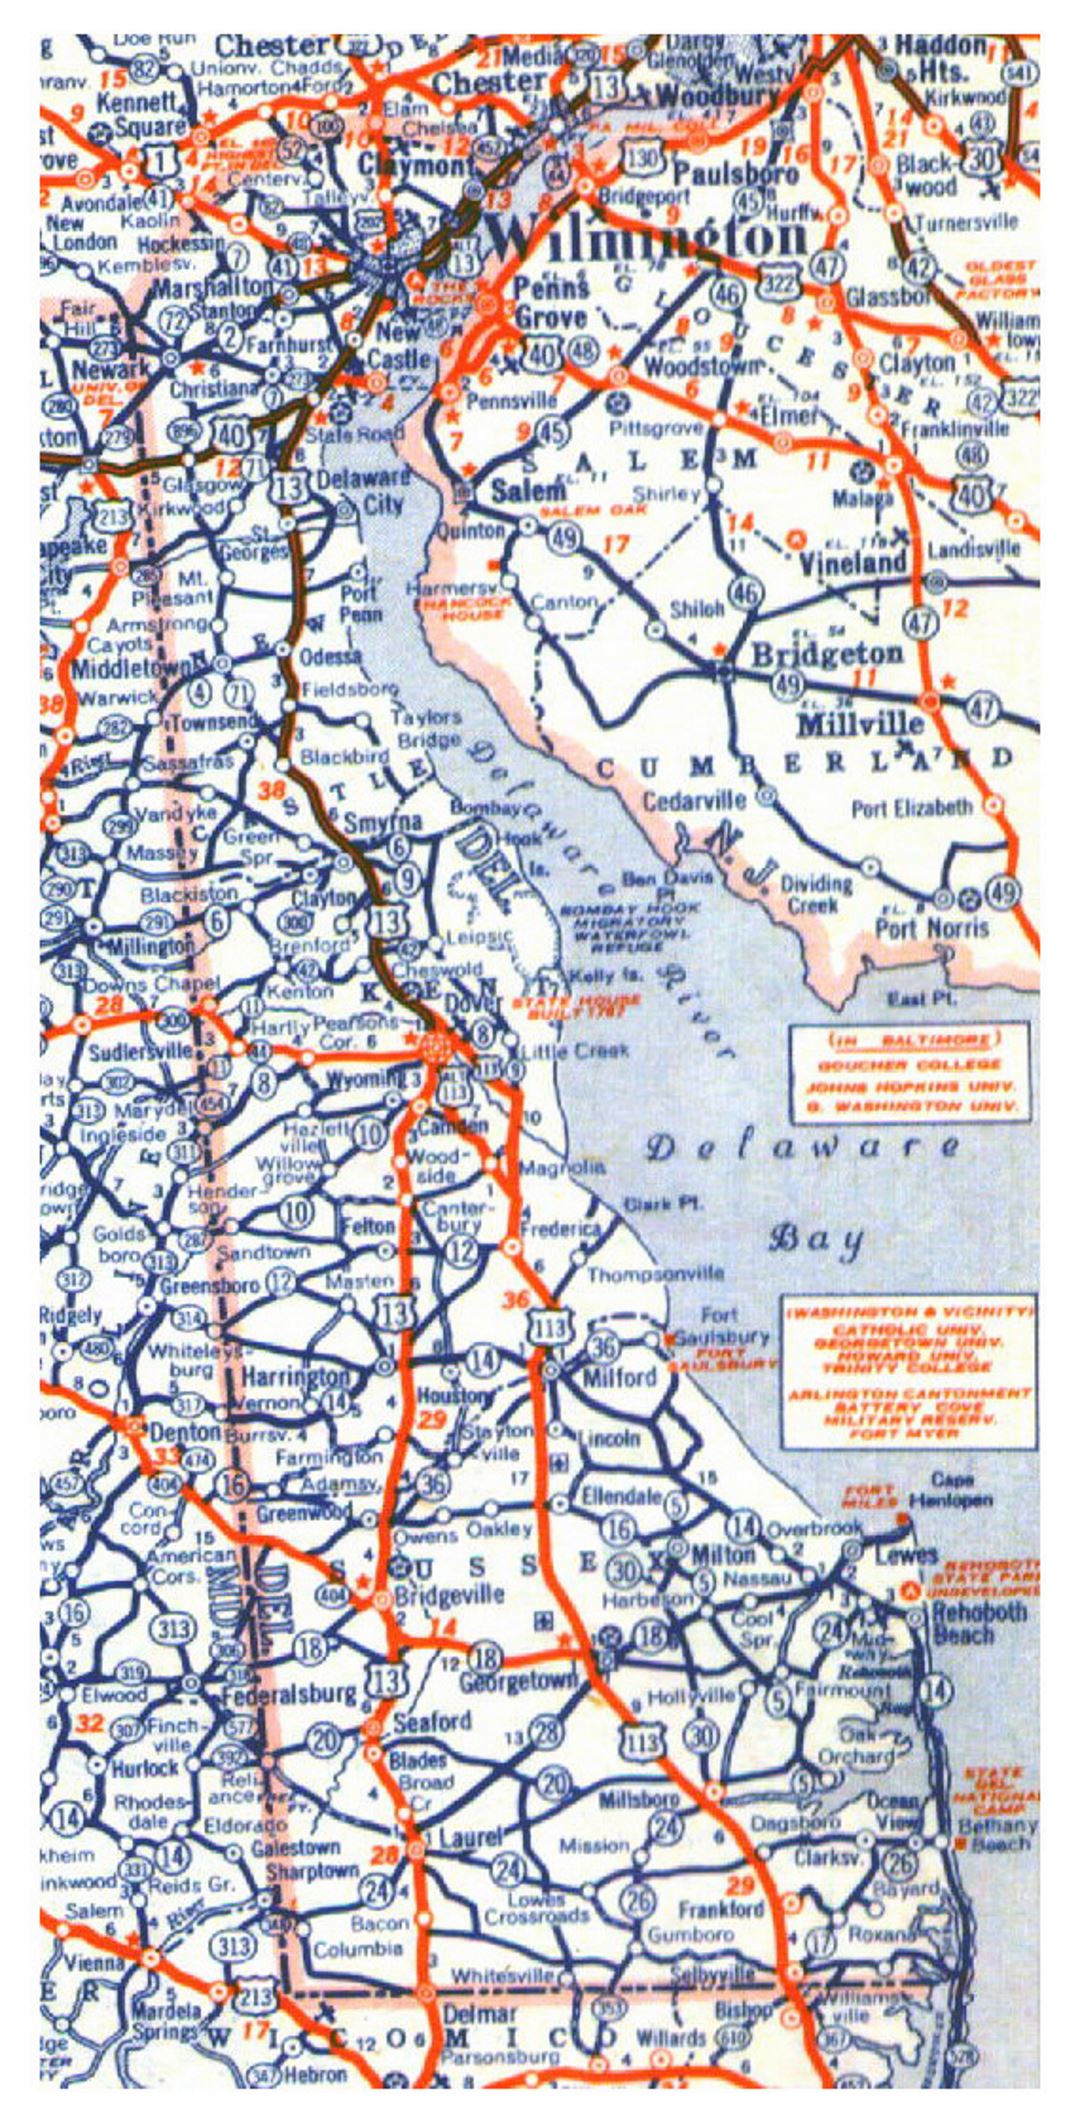 Roads and highways map of Delaware state - 1944